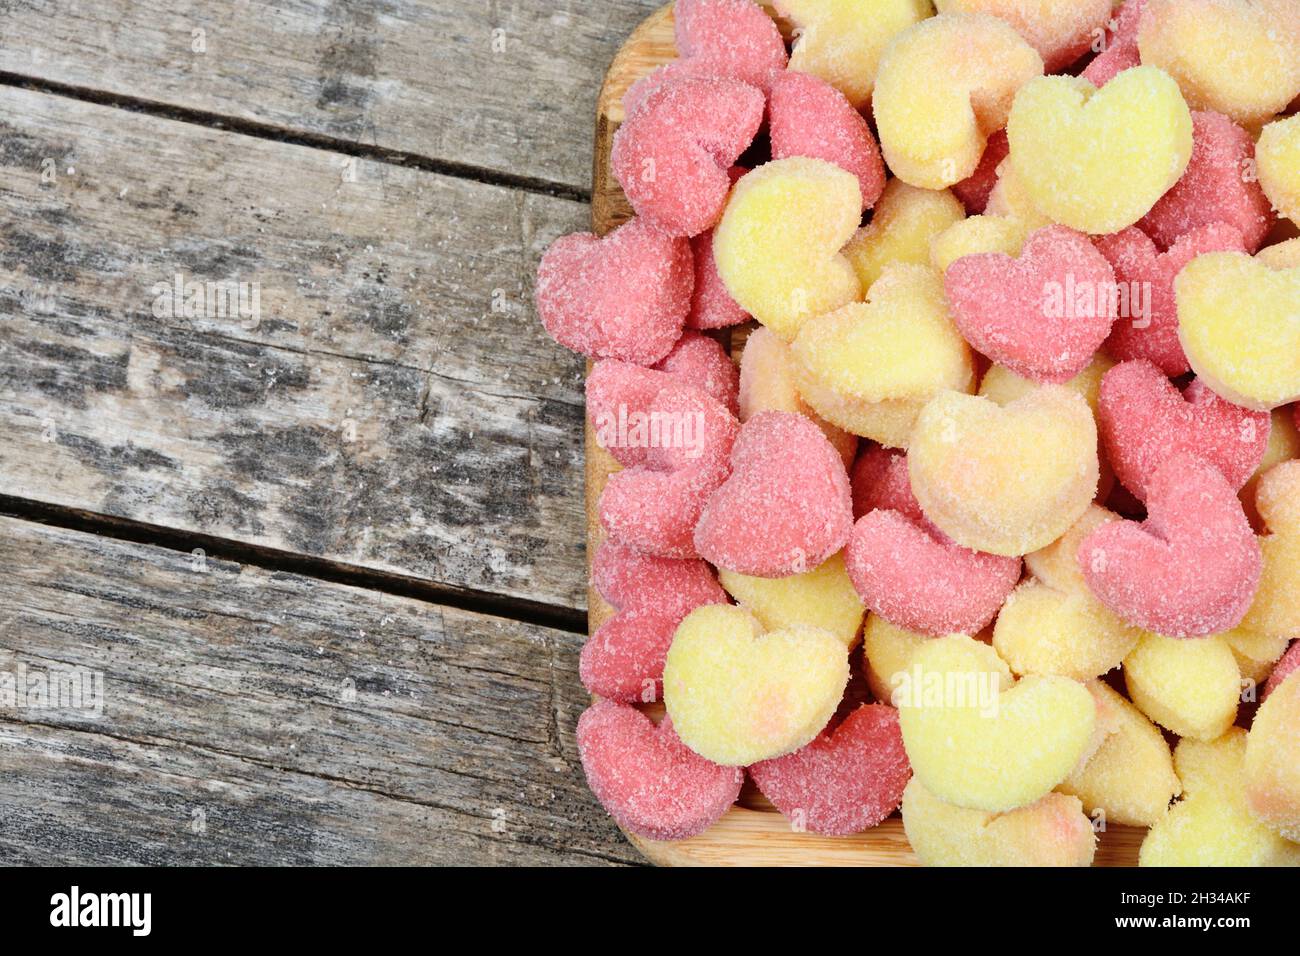 Many colorful gnocchi on a wooden cutting board close-up Stock Photo